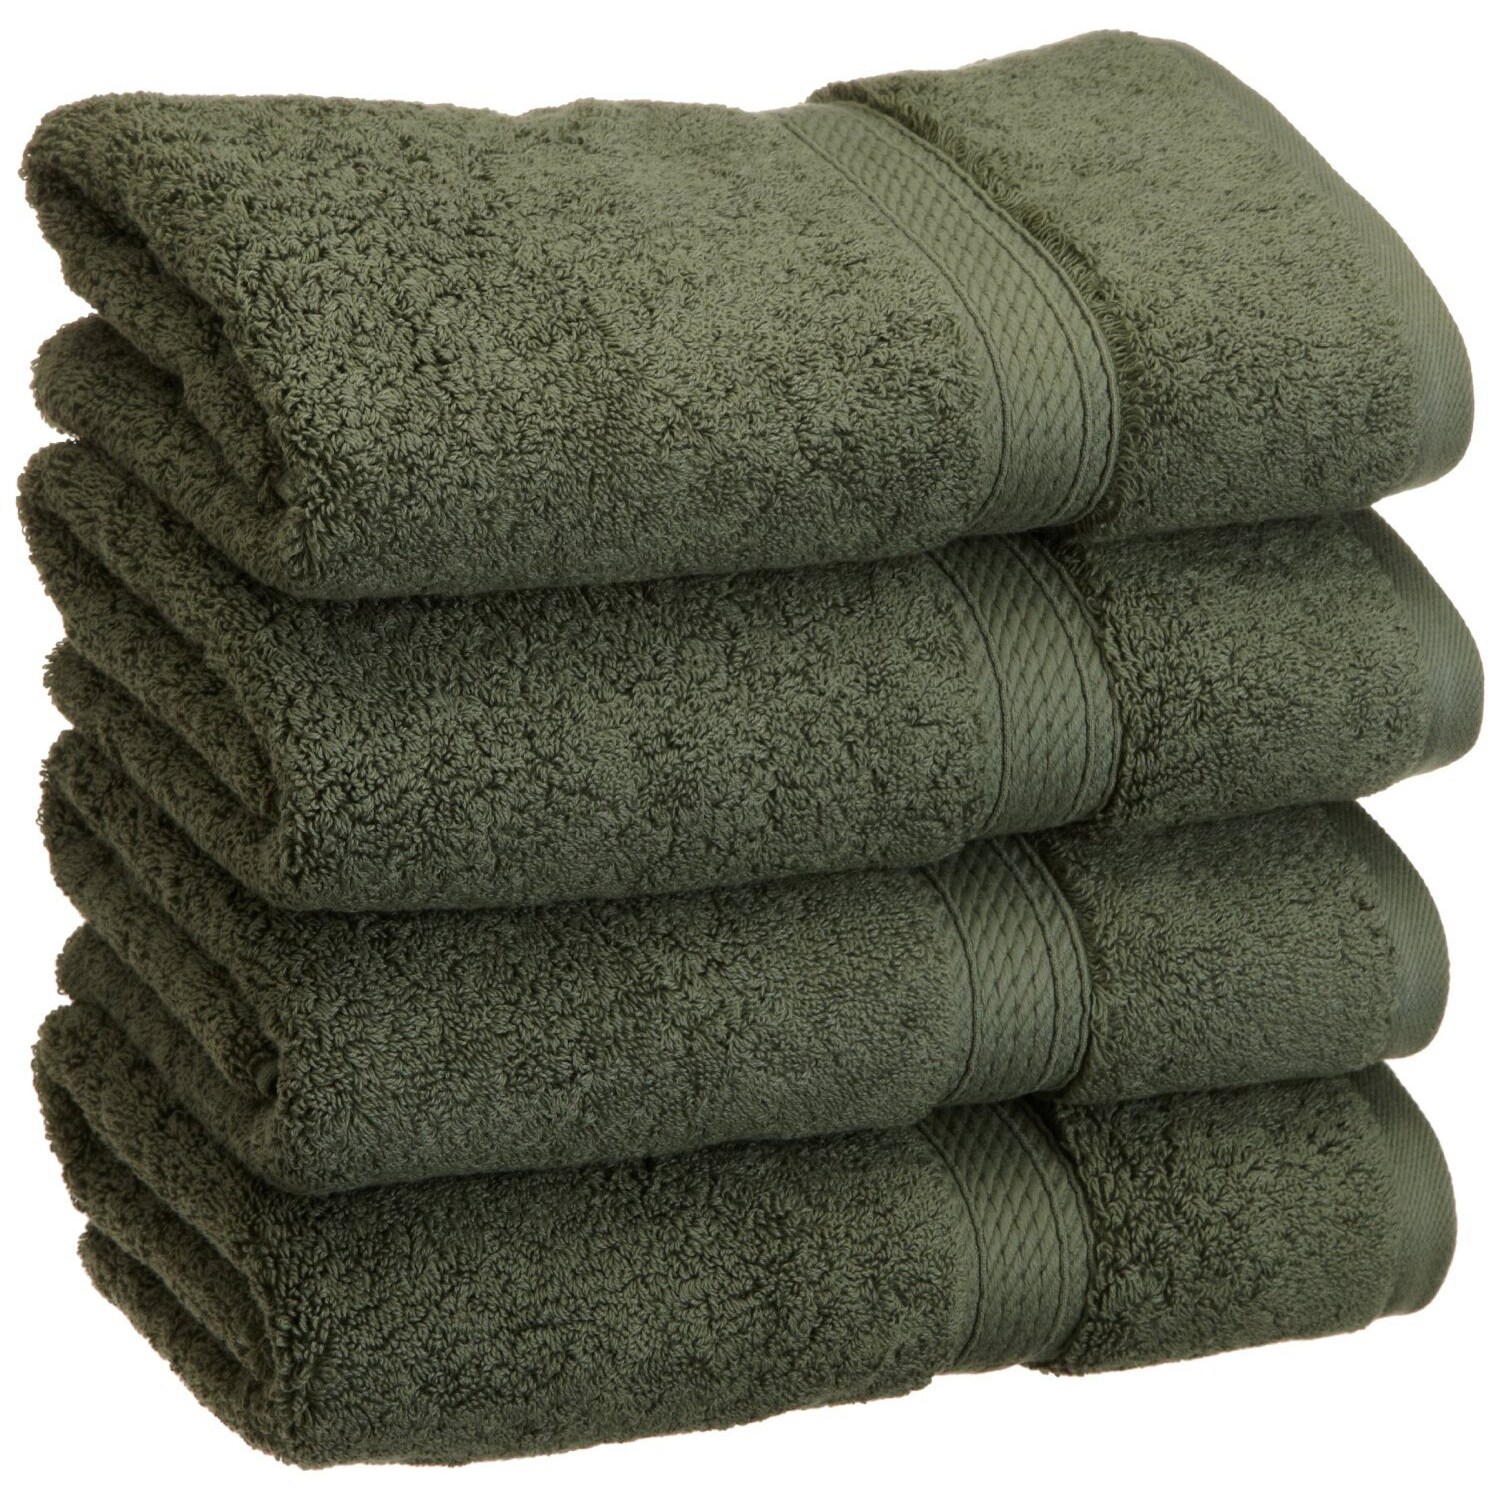 https://ak1.ostkcdn.com/images/products/5841944/Superior-Luxurious-and-Absorbent-900-GSM-Combed-Cotton-Hand-Towel-Set-of-4-2ab7f39f-853c-41cf-8c3a-80826d3ed91a.jpg